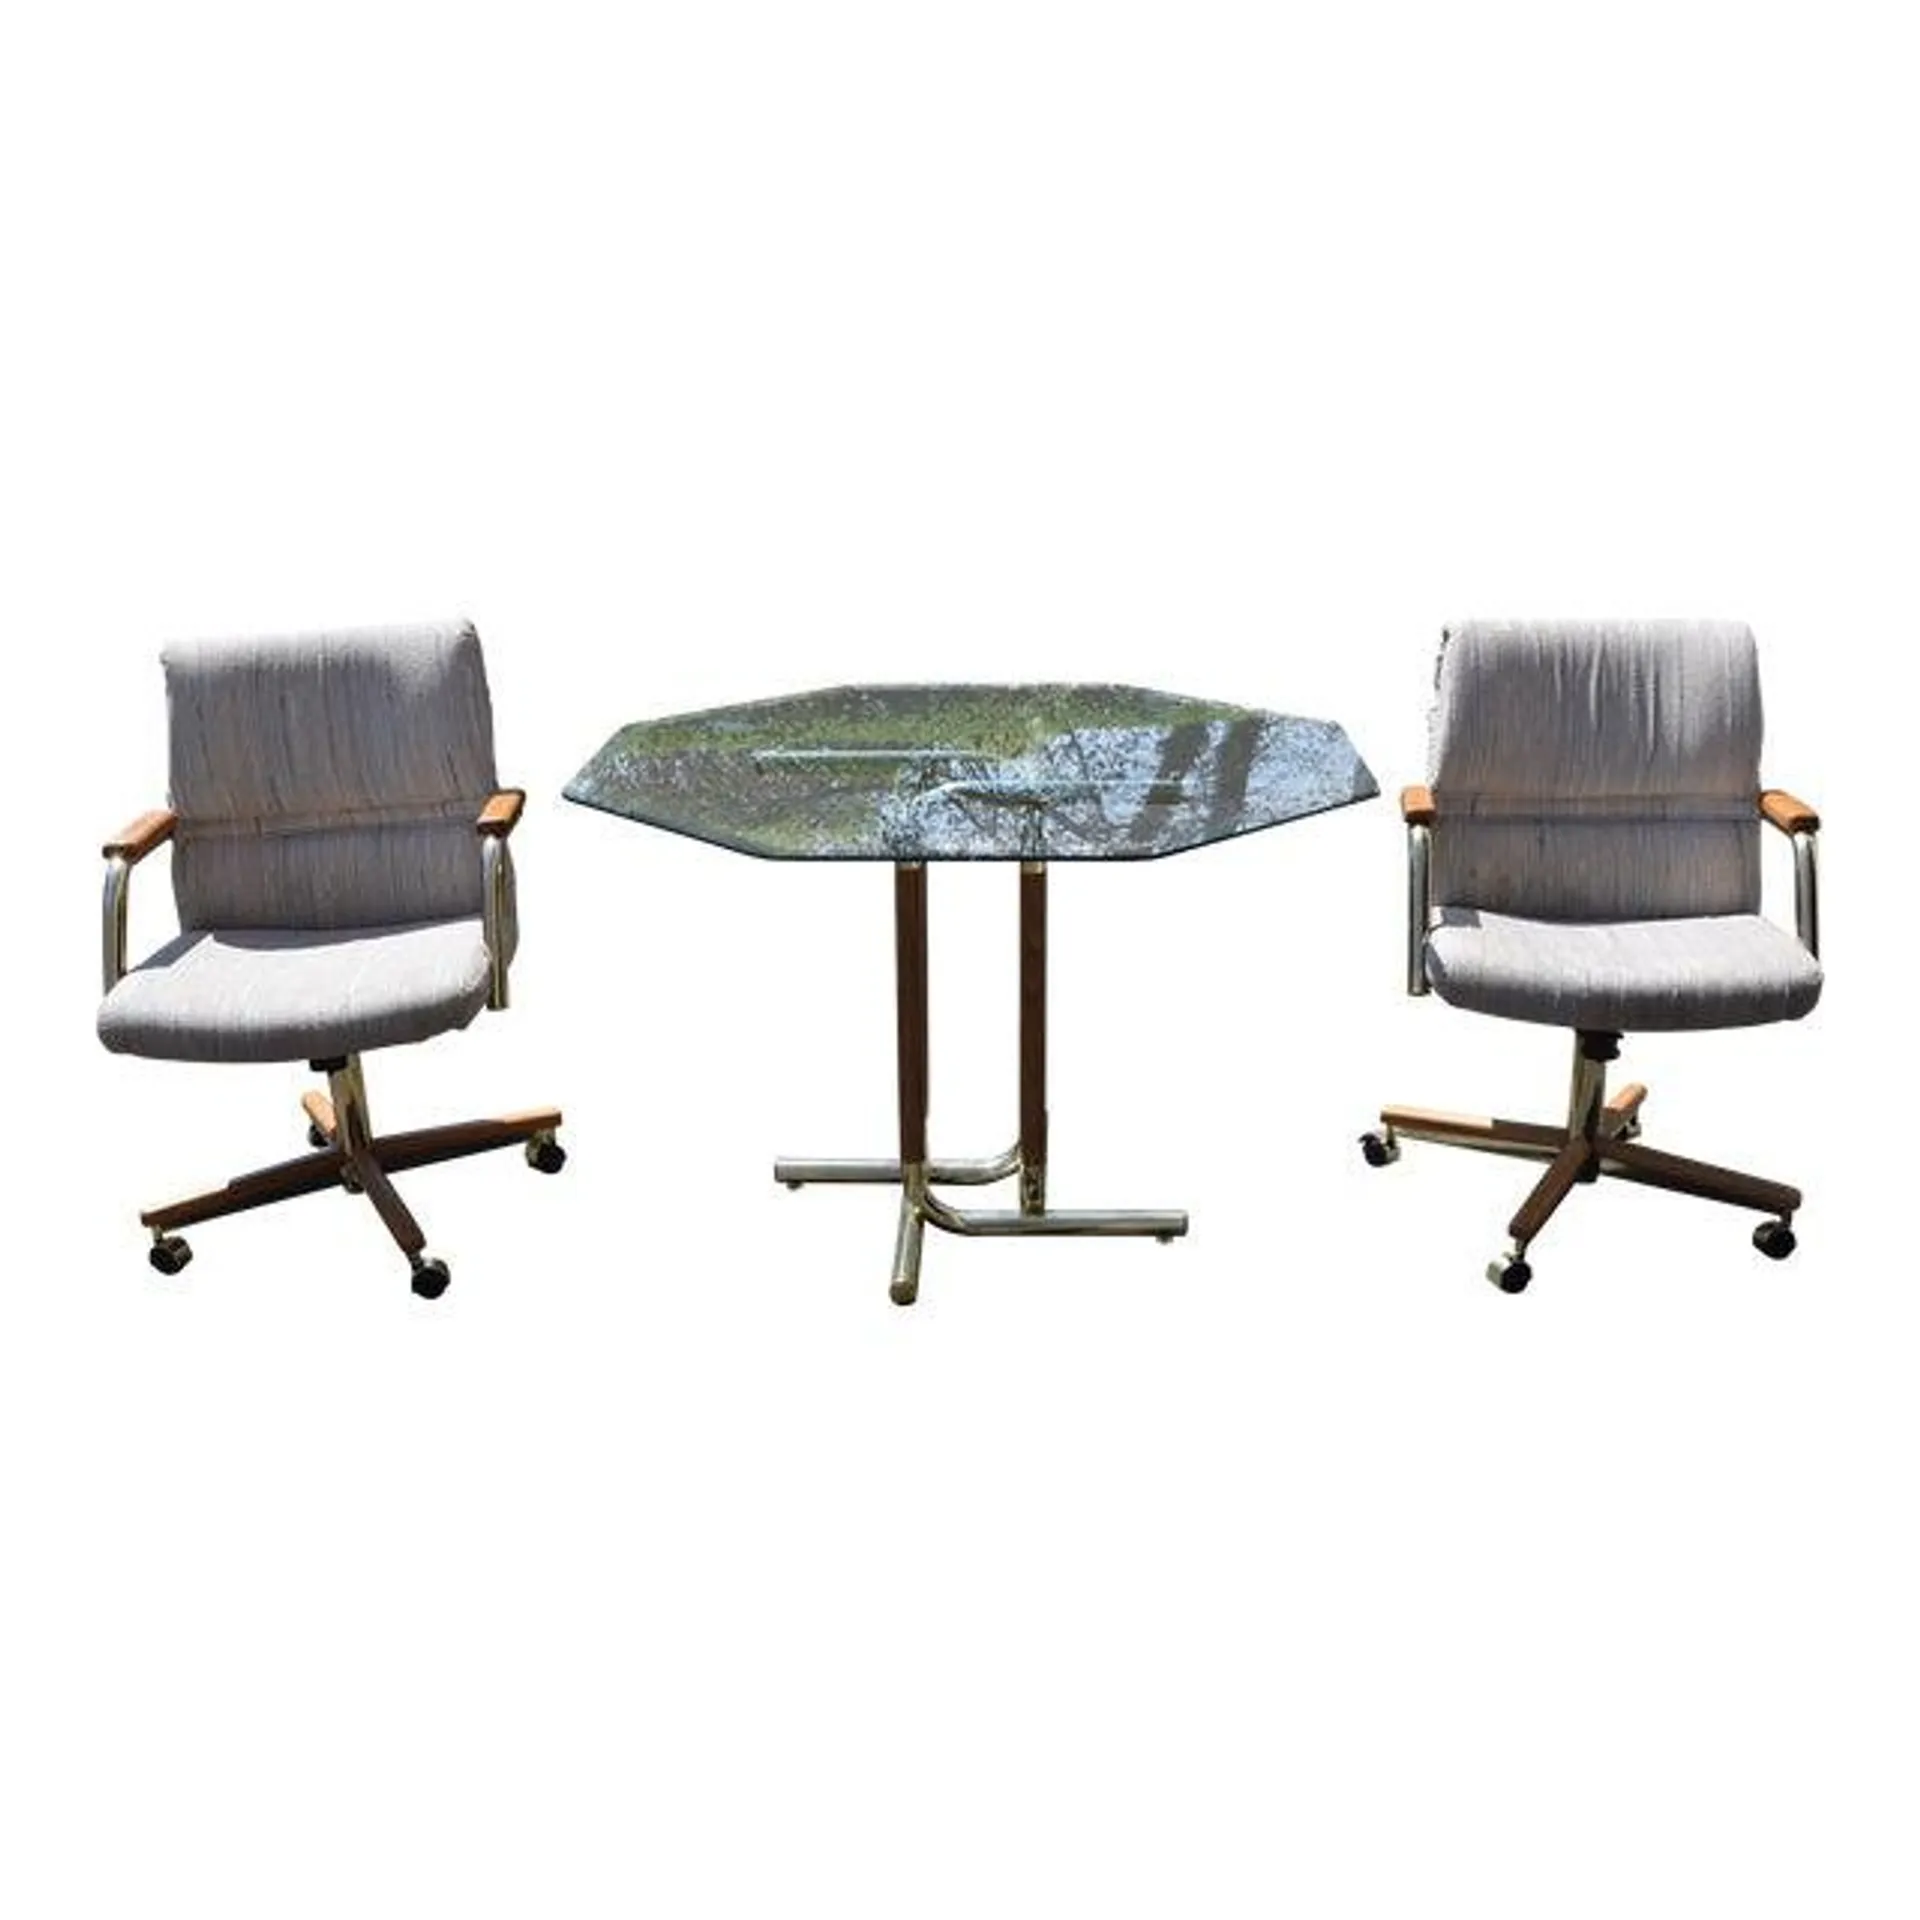 1980s Vintage Chromcraft Brass Legs, Glass Top Mid Century Modern Table with 2 Chairs - Set of 3